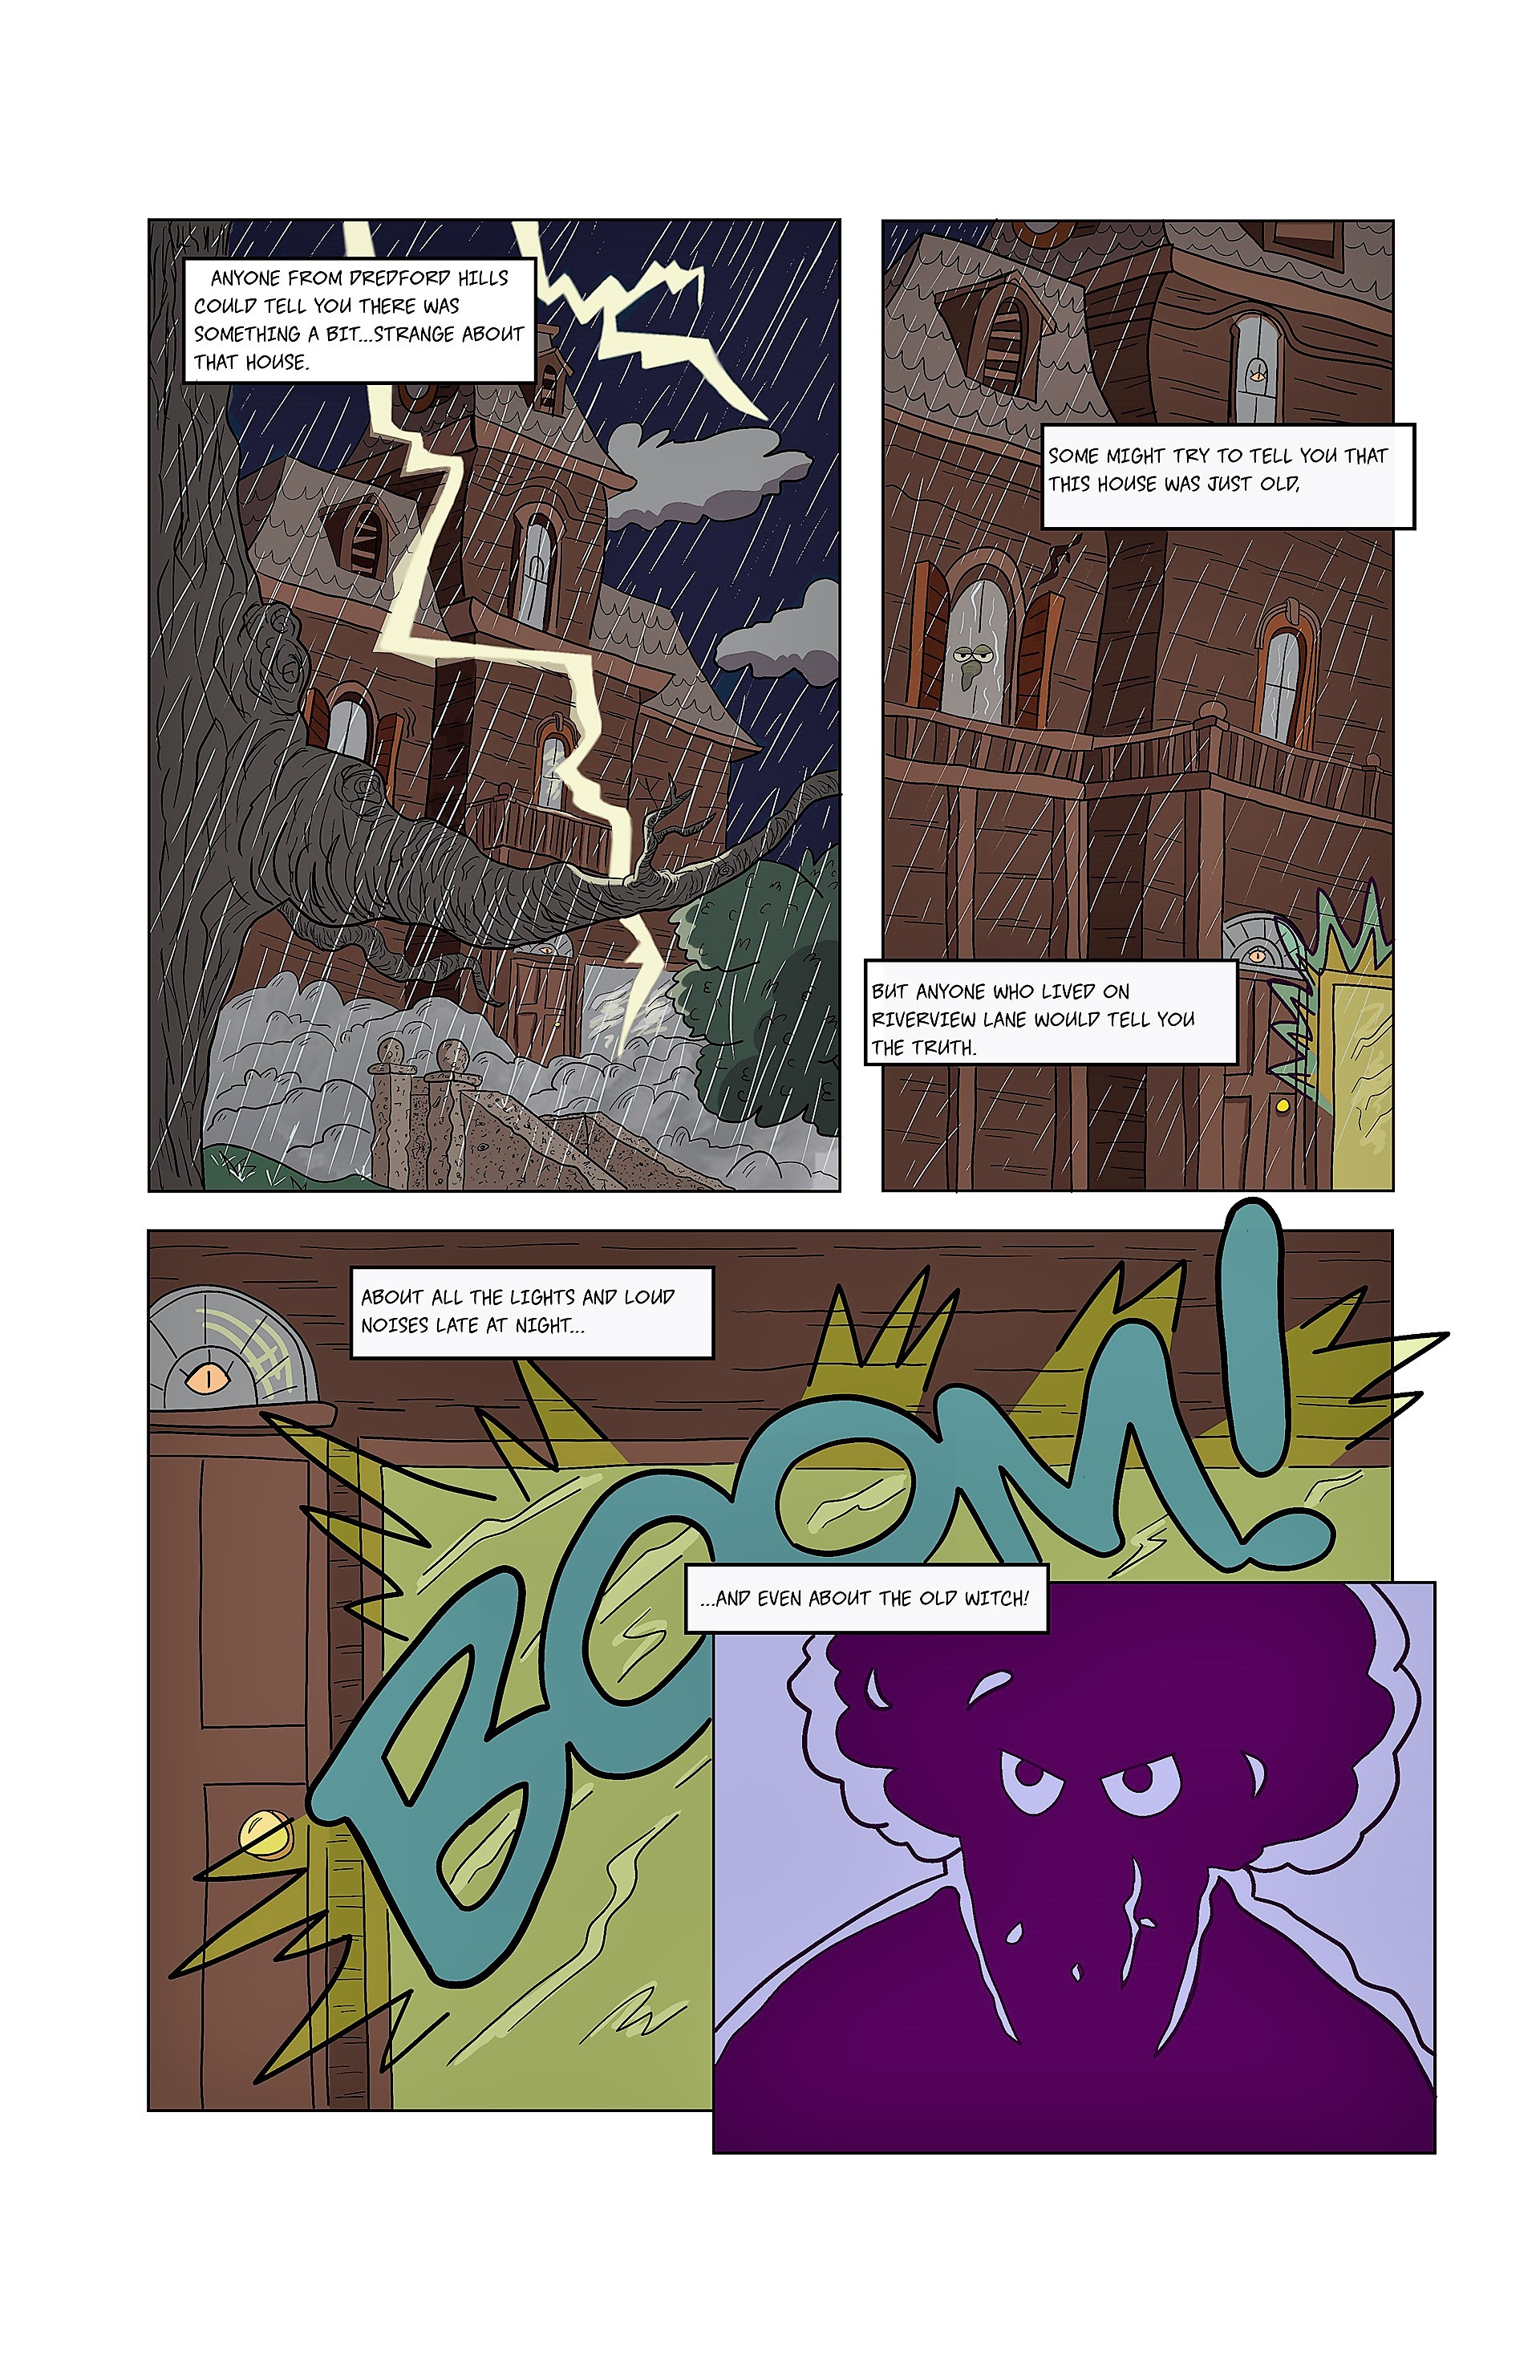 A page from "The Whimsical Adventures of Ella & Virgil," HFC alumnus M. Cody Wiley's comic book series. 